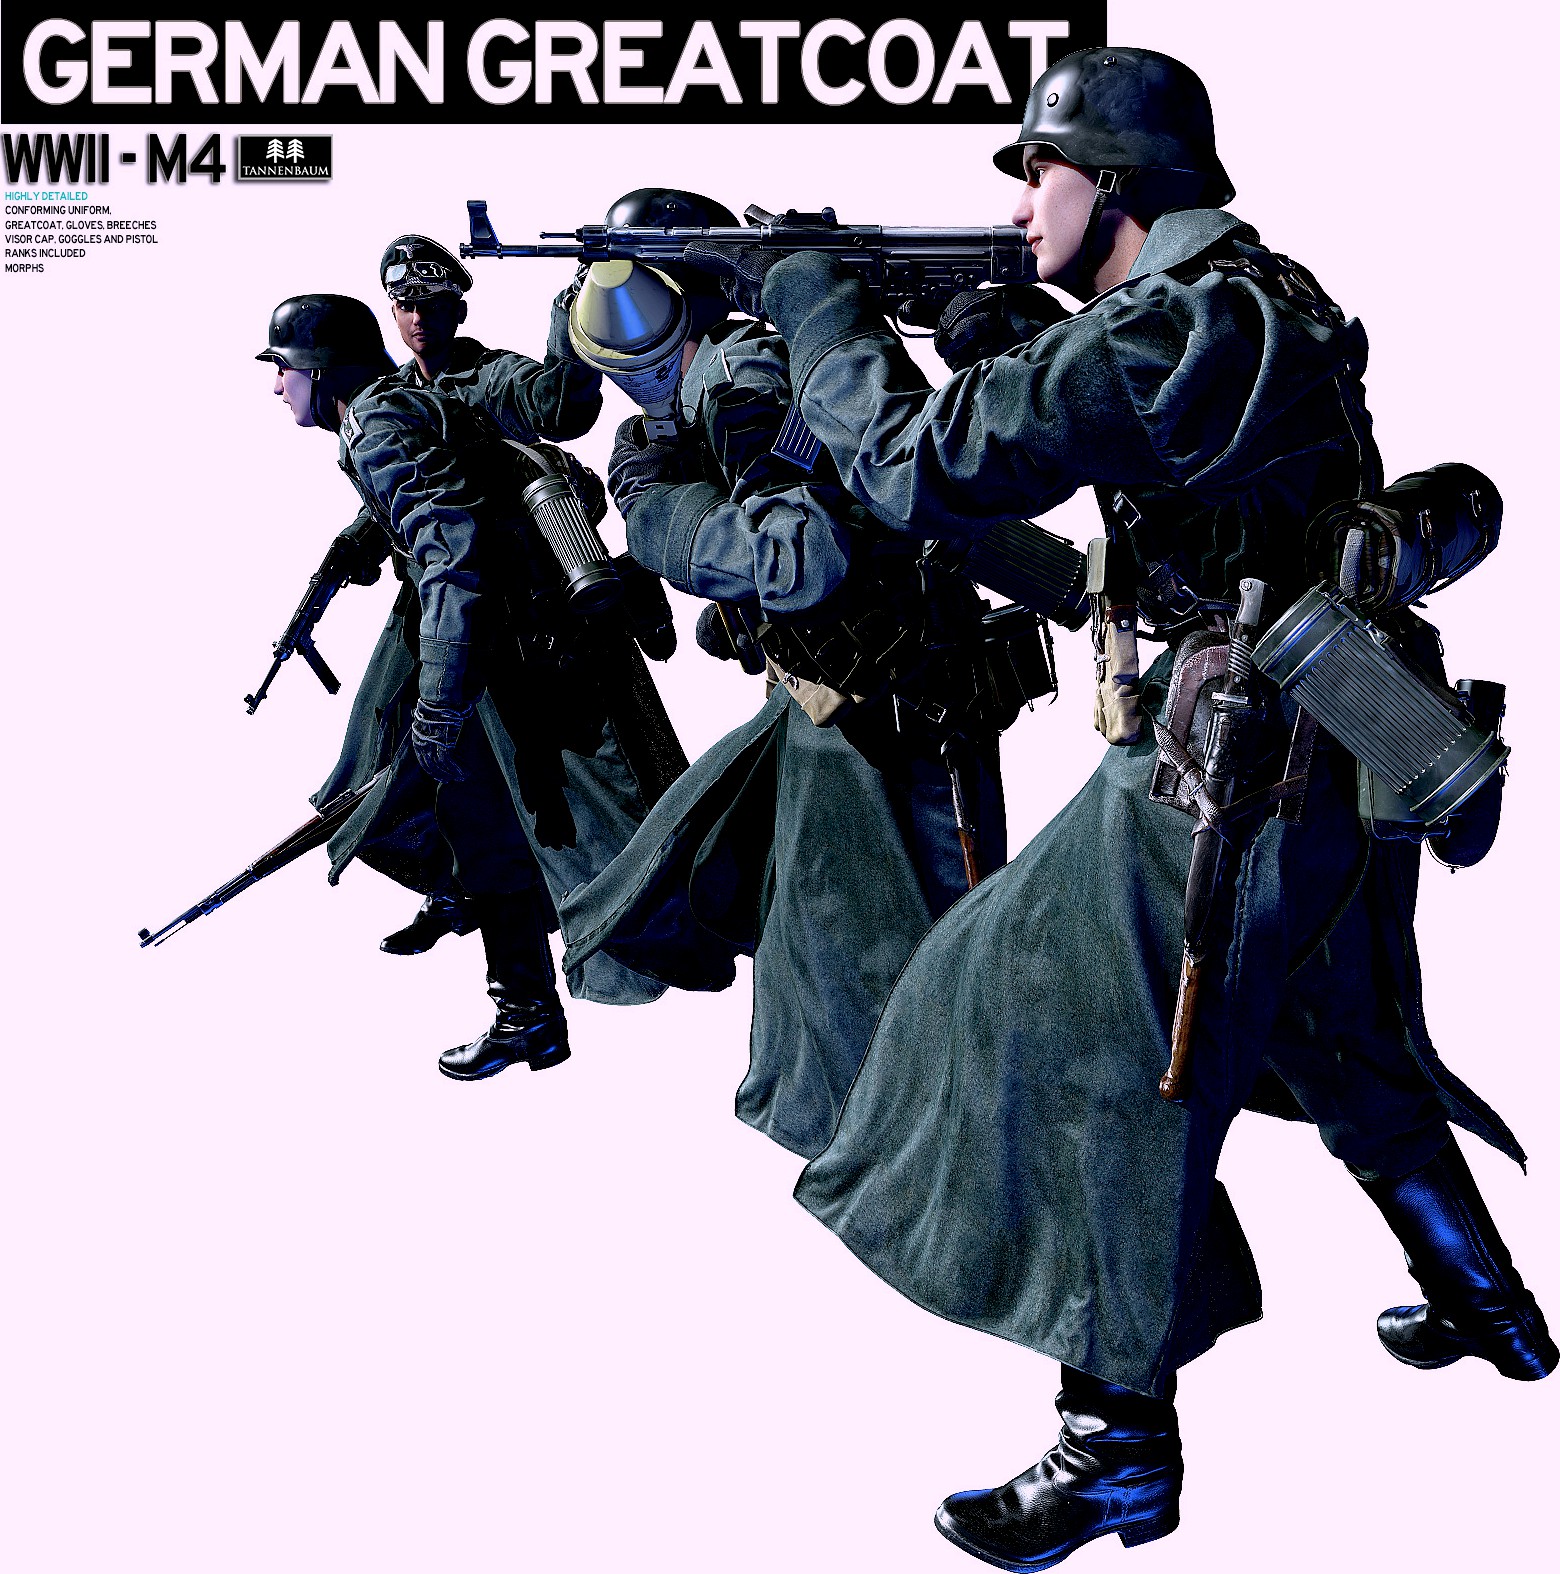 German Greatcoat WWII - Extended License